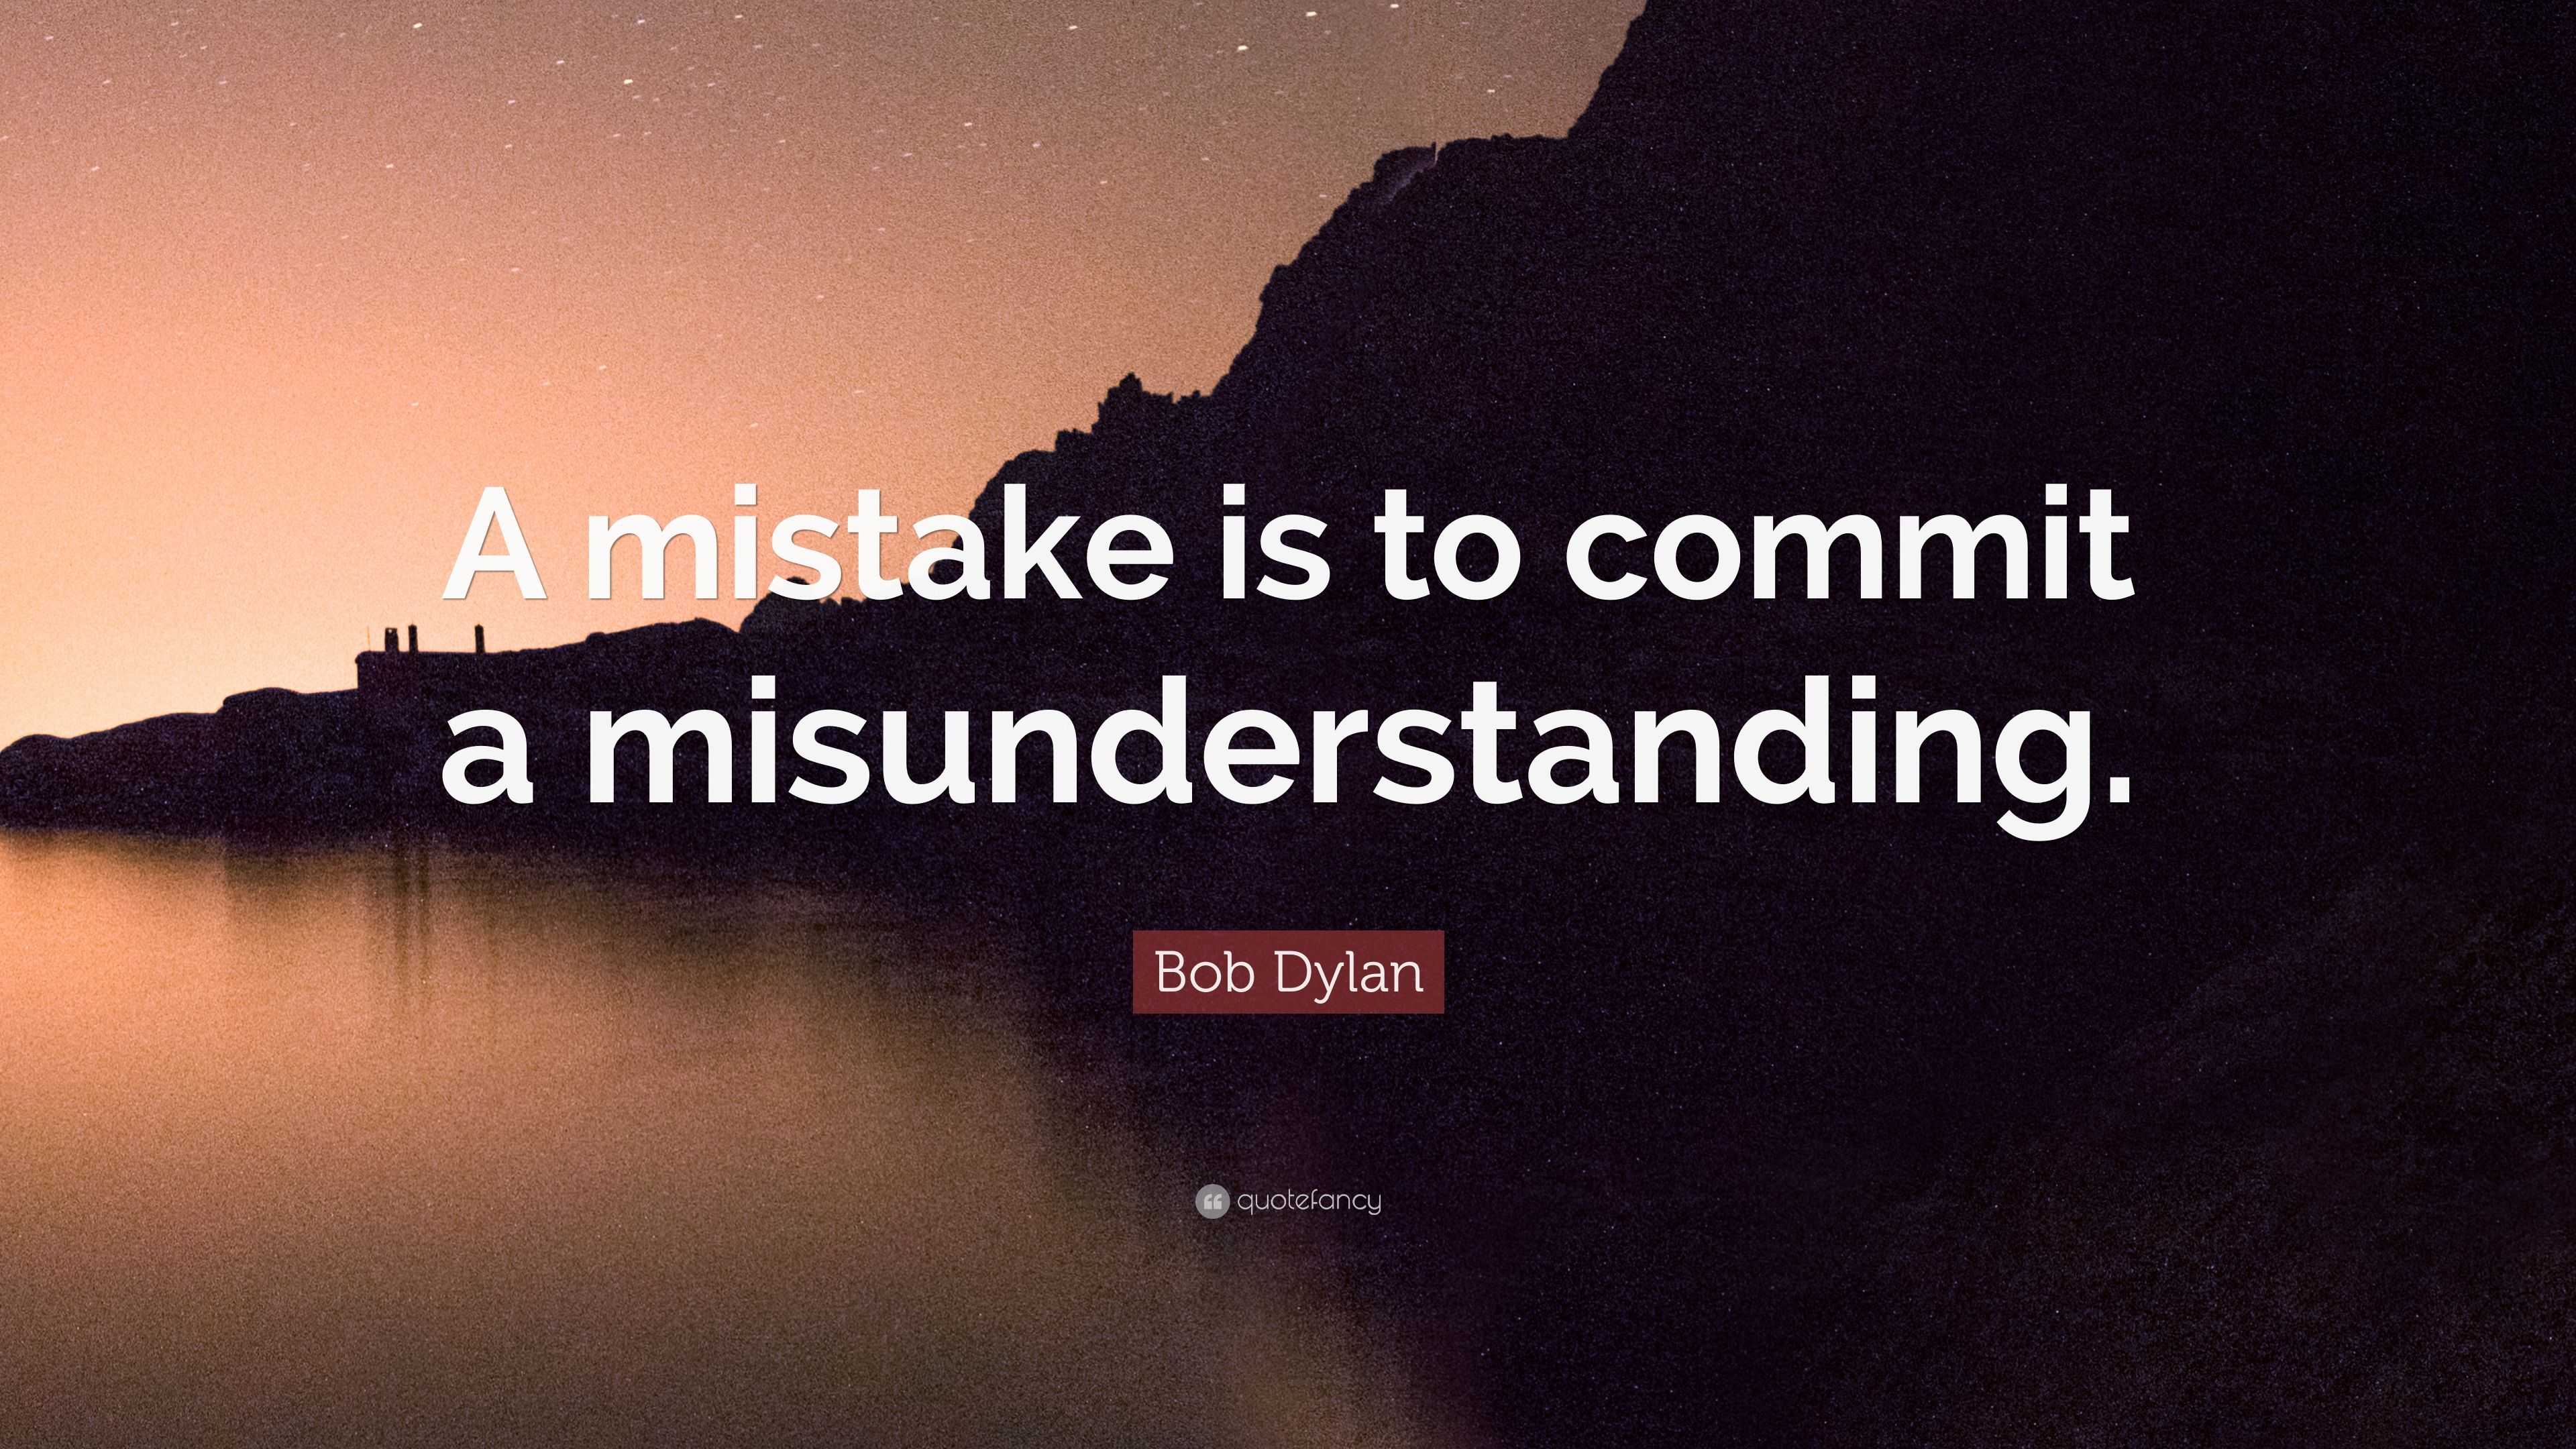 Bob Dylan Quote: “A mistake is to commit a misunderstanding.”